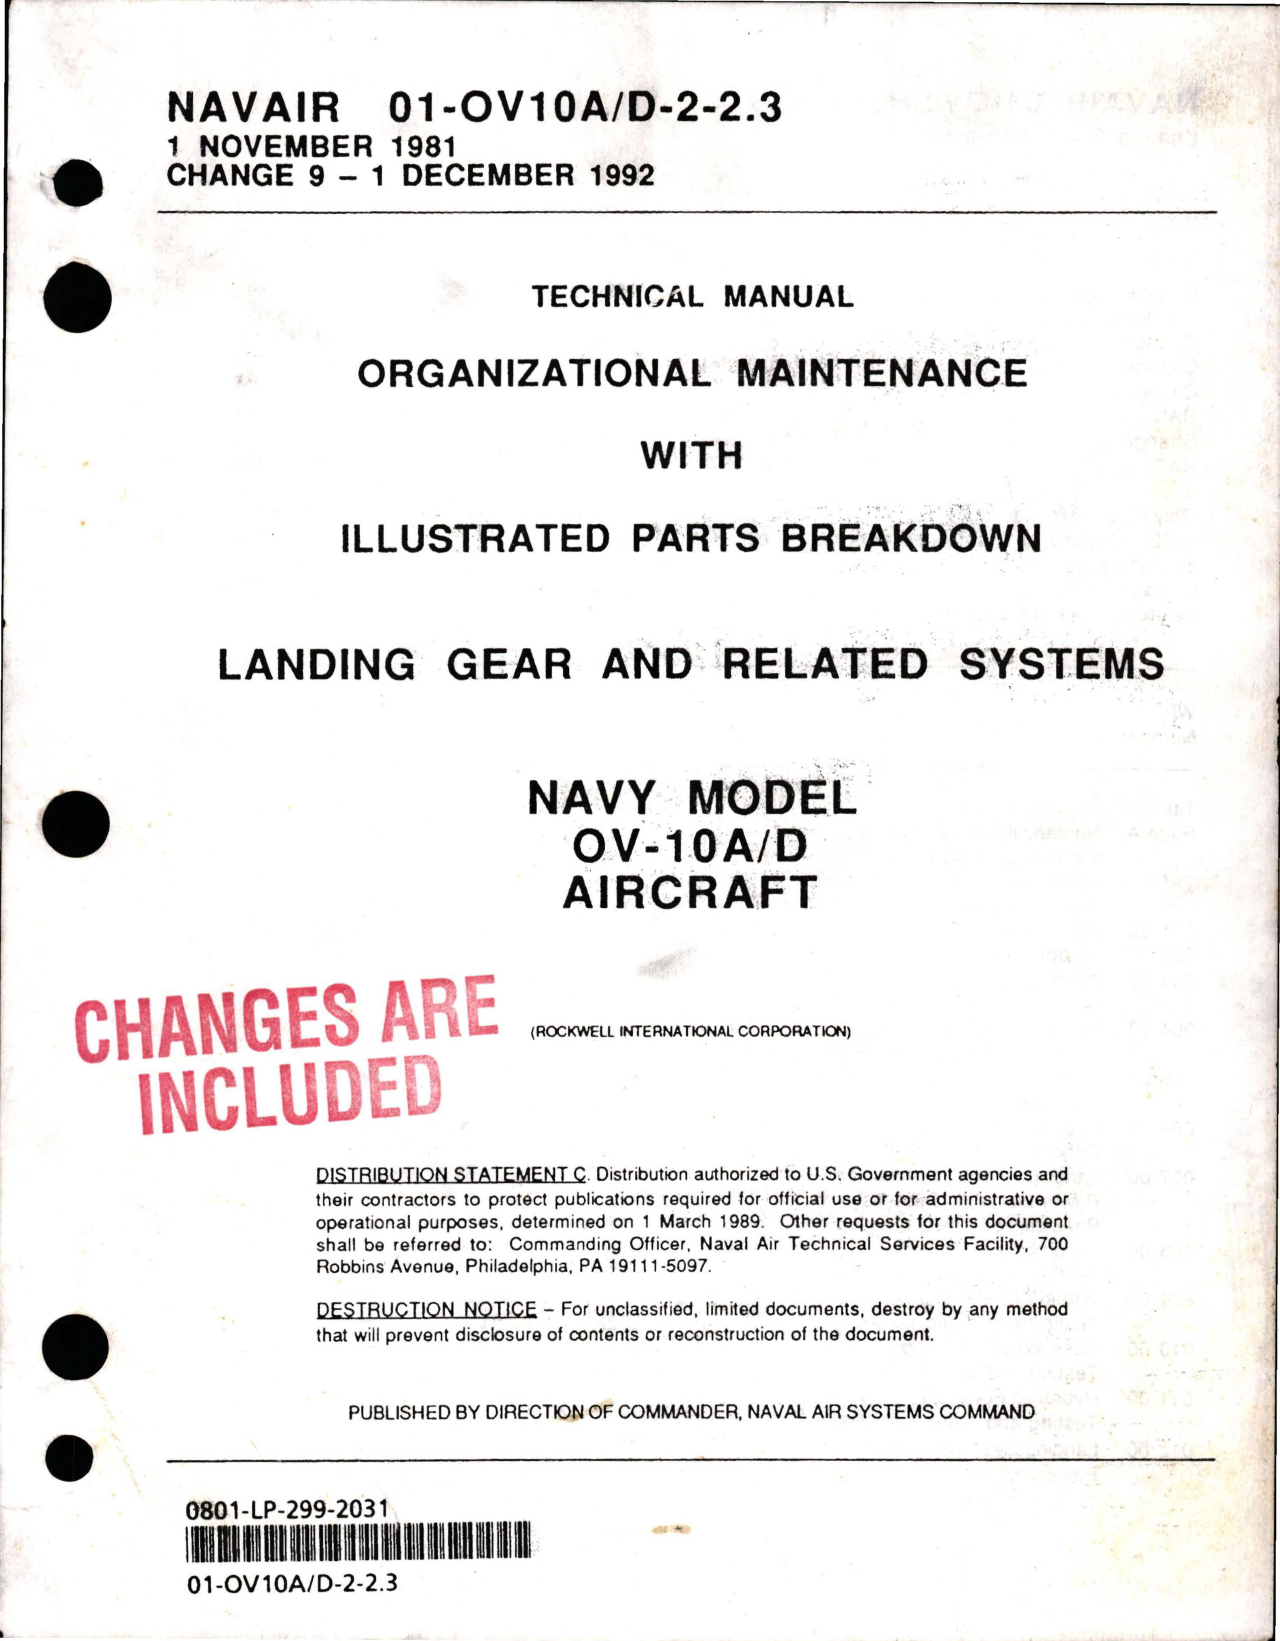 Sample page 1 from AirCorps Library document: Organizational Maintenance with Illustrated Parts Breakdown for Landing Gear and Related Systems for OV-10A/D 